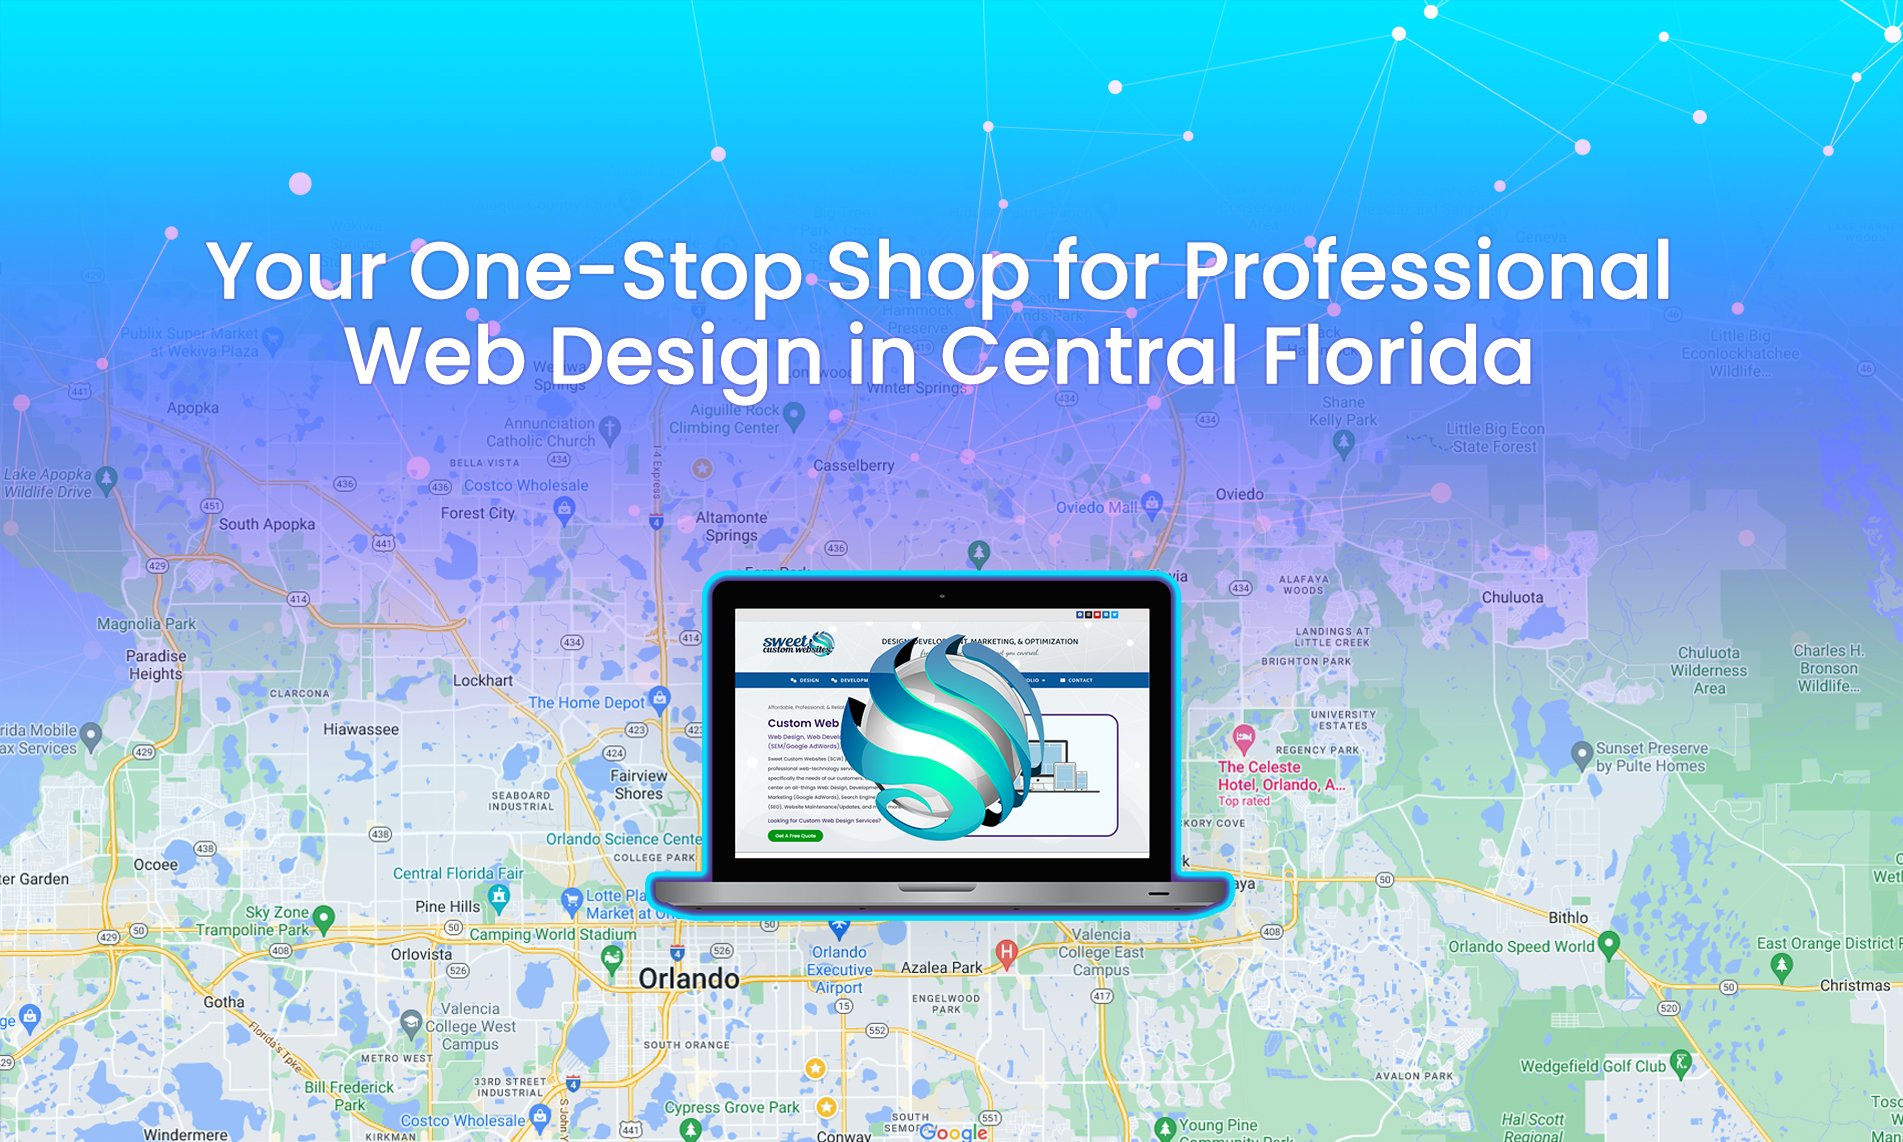 Your One-Stop Shop for Professional Web Design in Central Florida